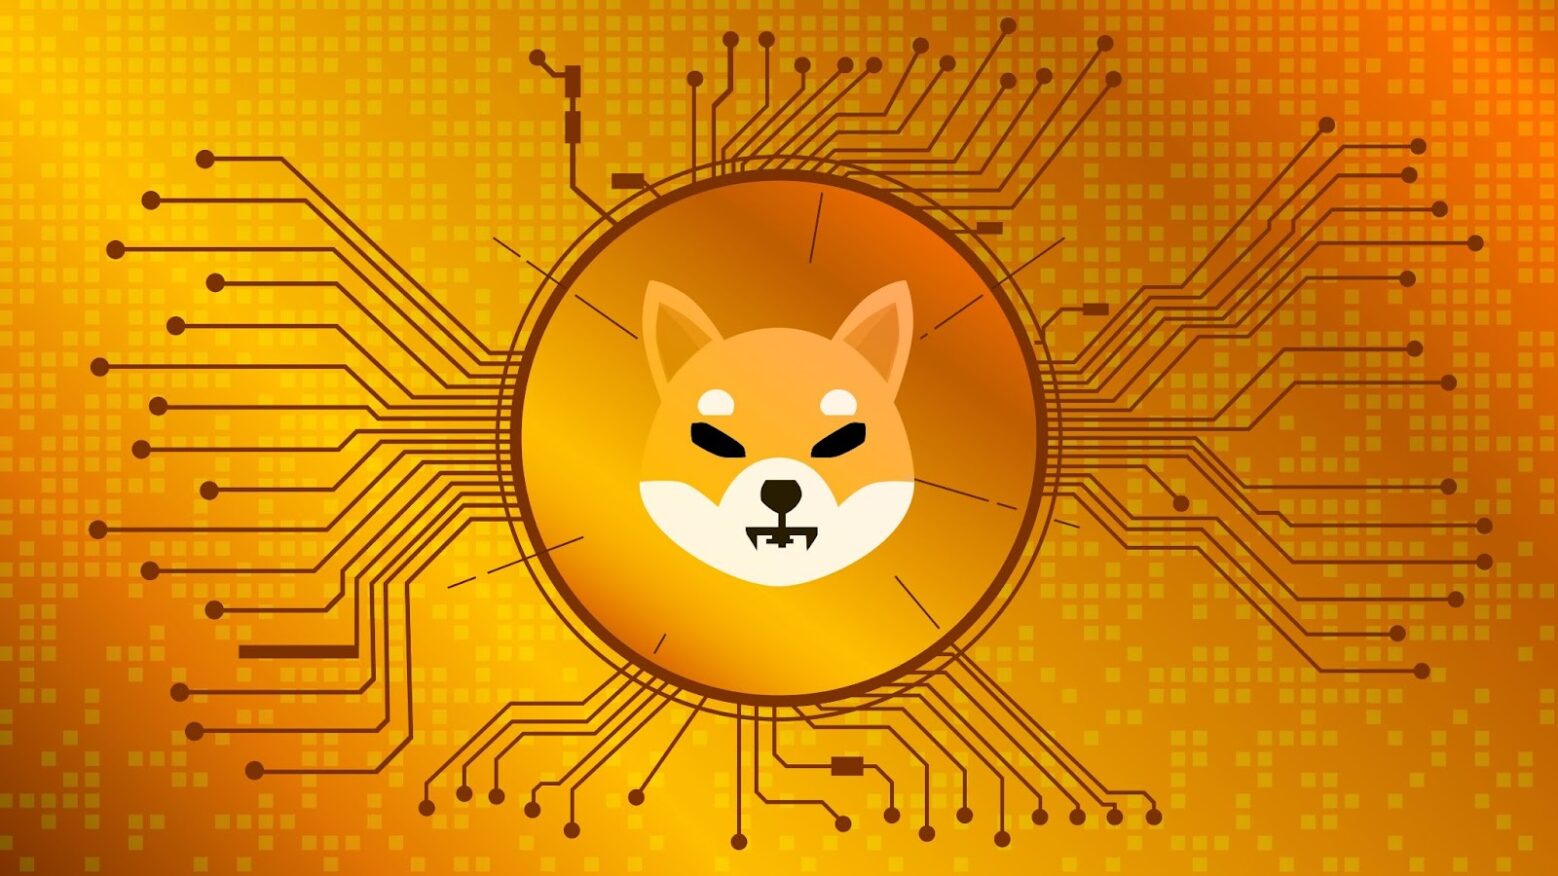 Who Accepts Shiba Inu as Payment? Where Can I Spend My Shiba Inu Coin?